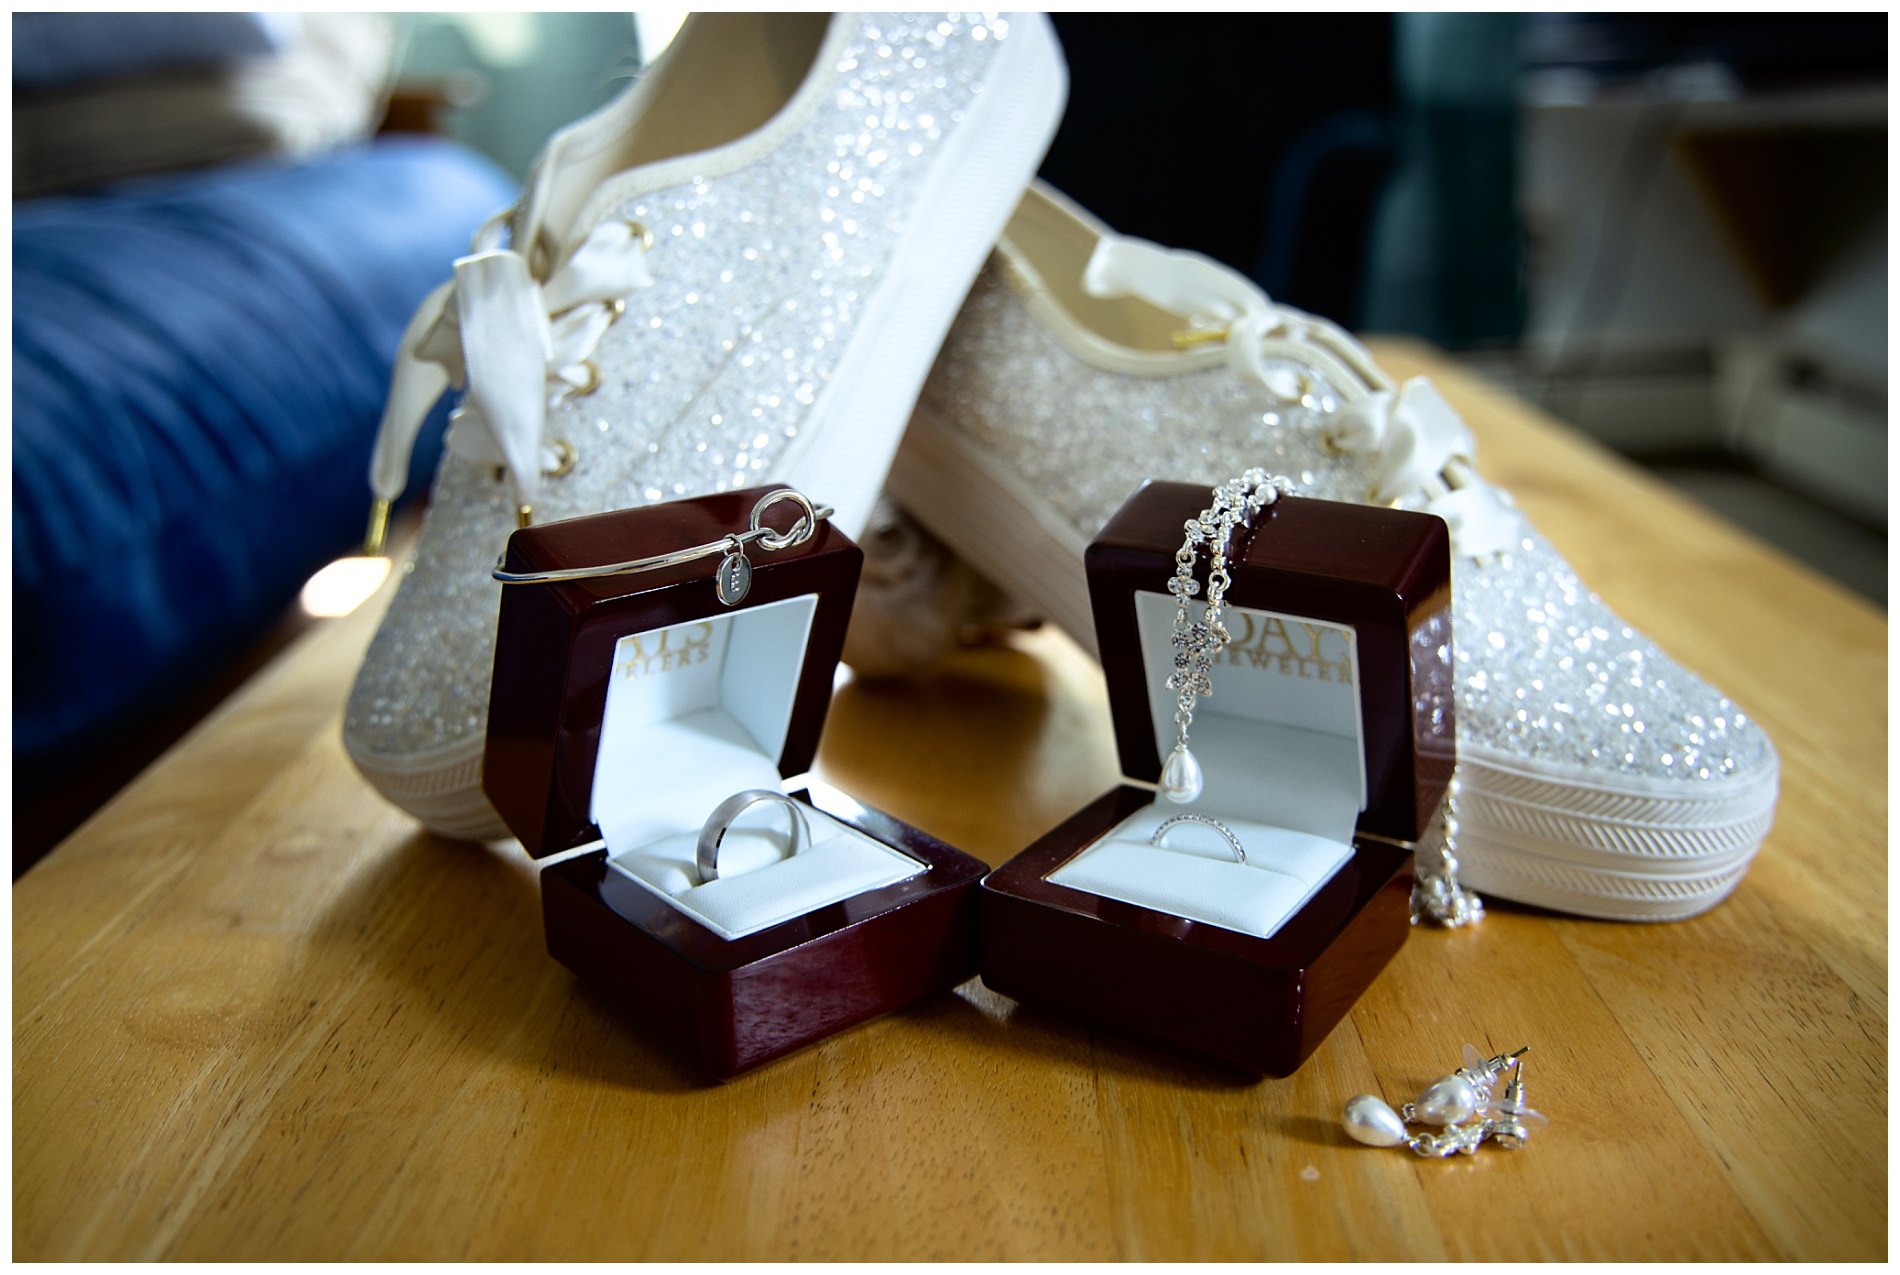 wedding rings with jewelry and shoes